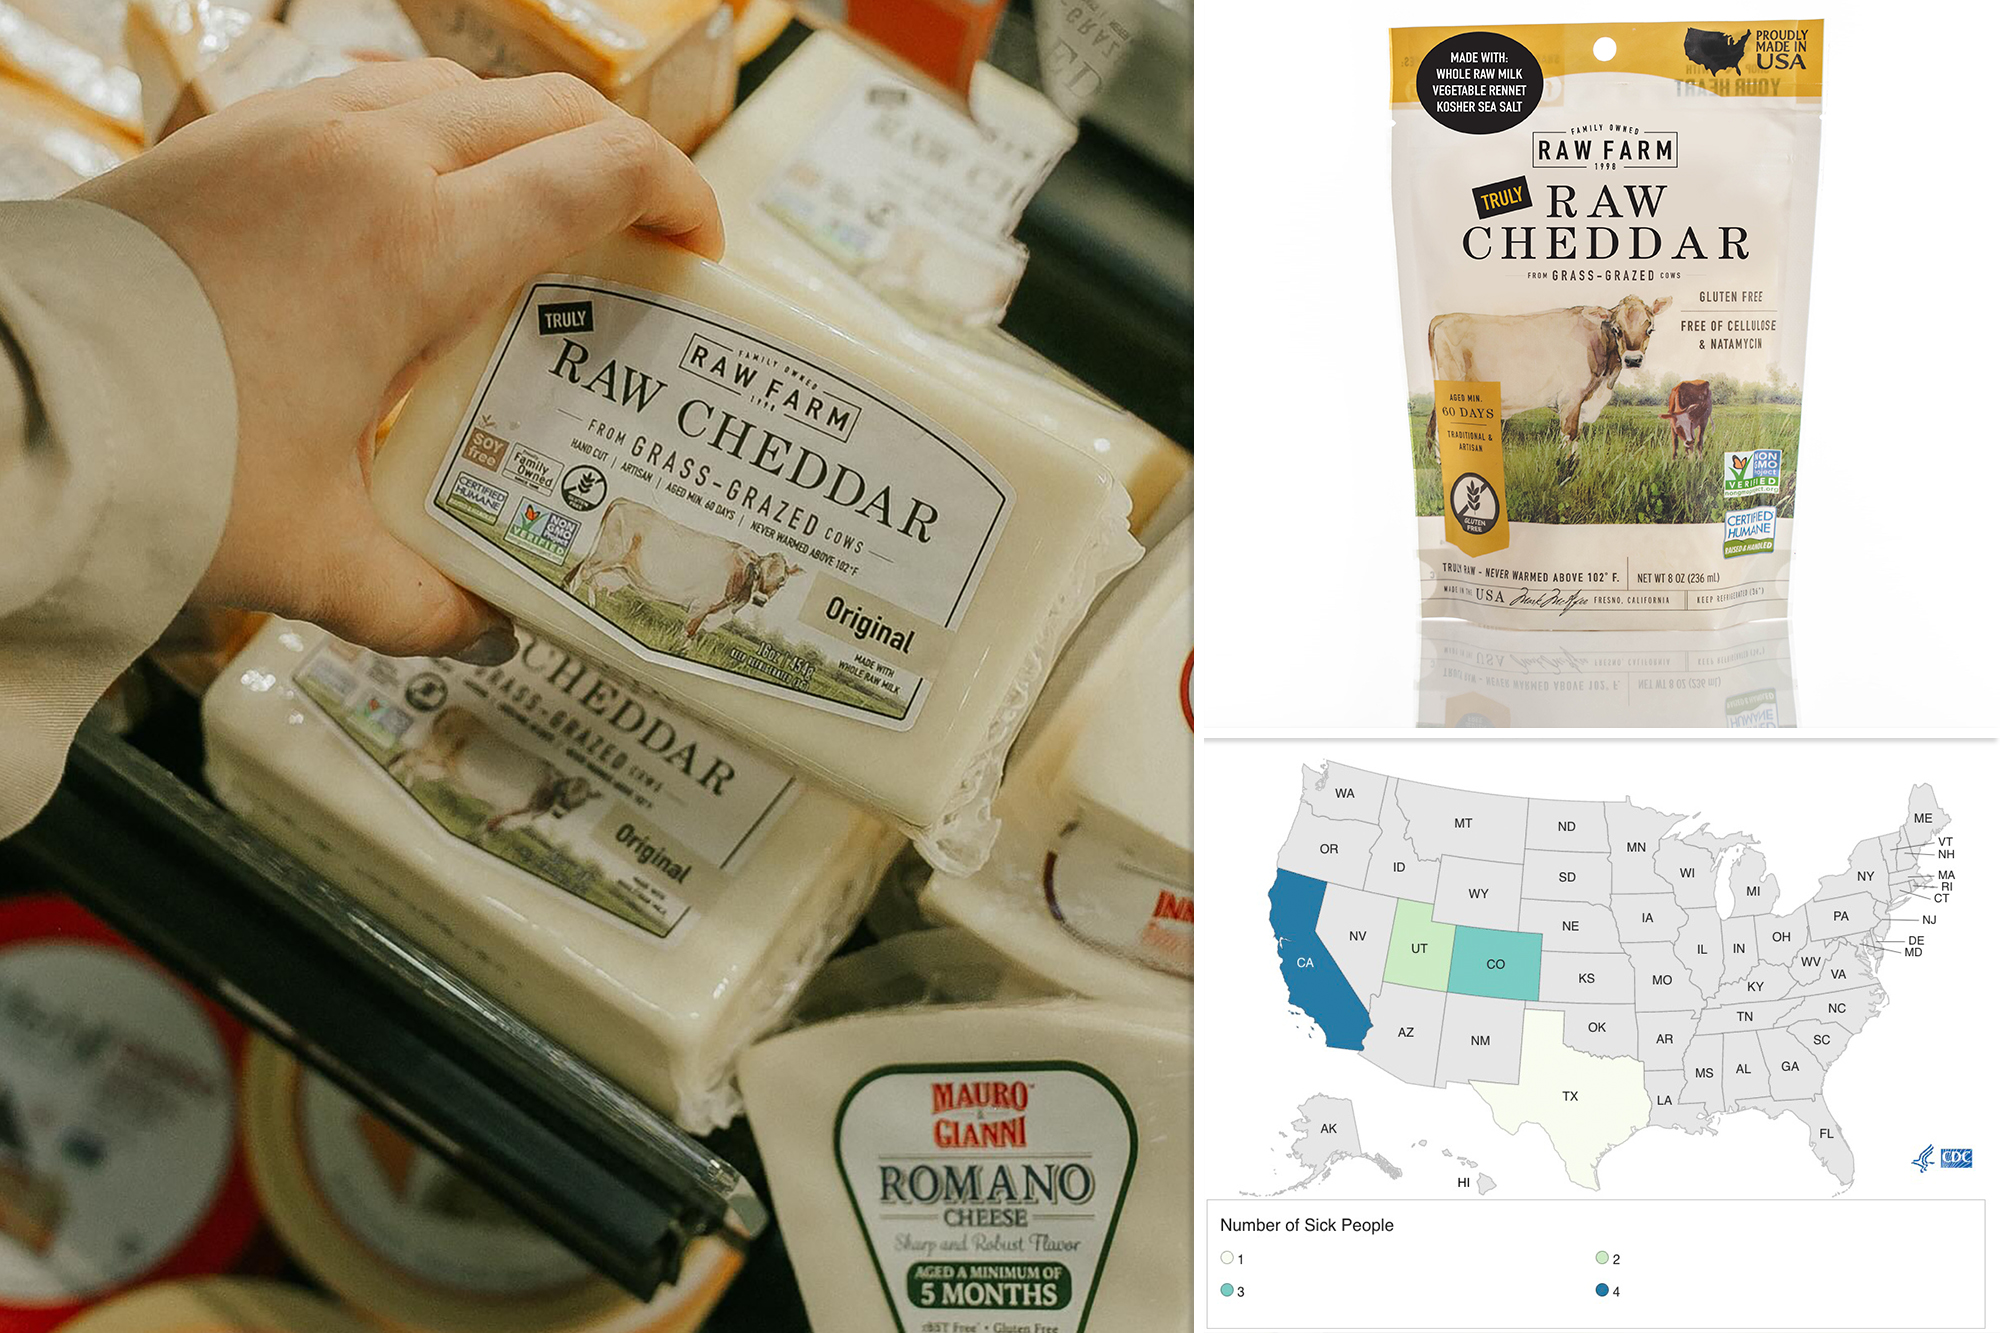 Raw Farm LLC, a producer of raw dairy products that include cheese, butter, and milk, has voluntarily recalled four of its cheddar products in connection to a multistate E. coli outbreak.